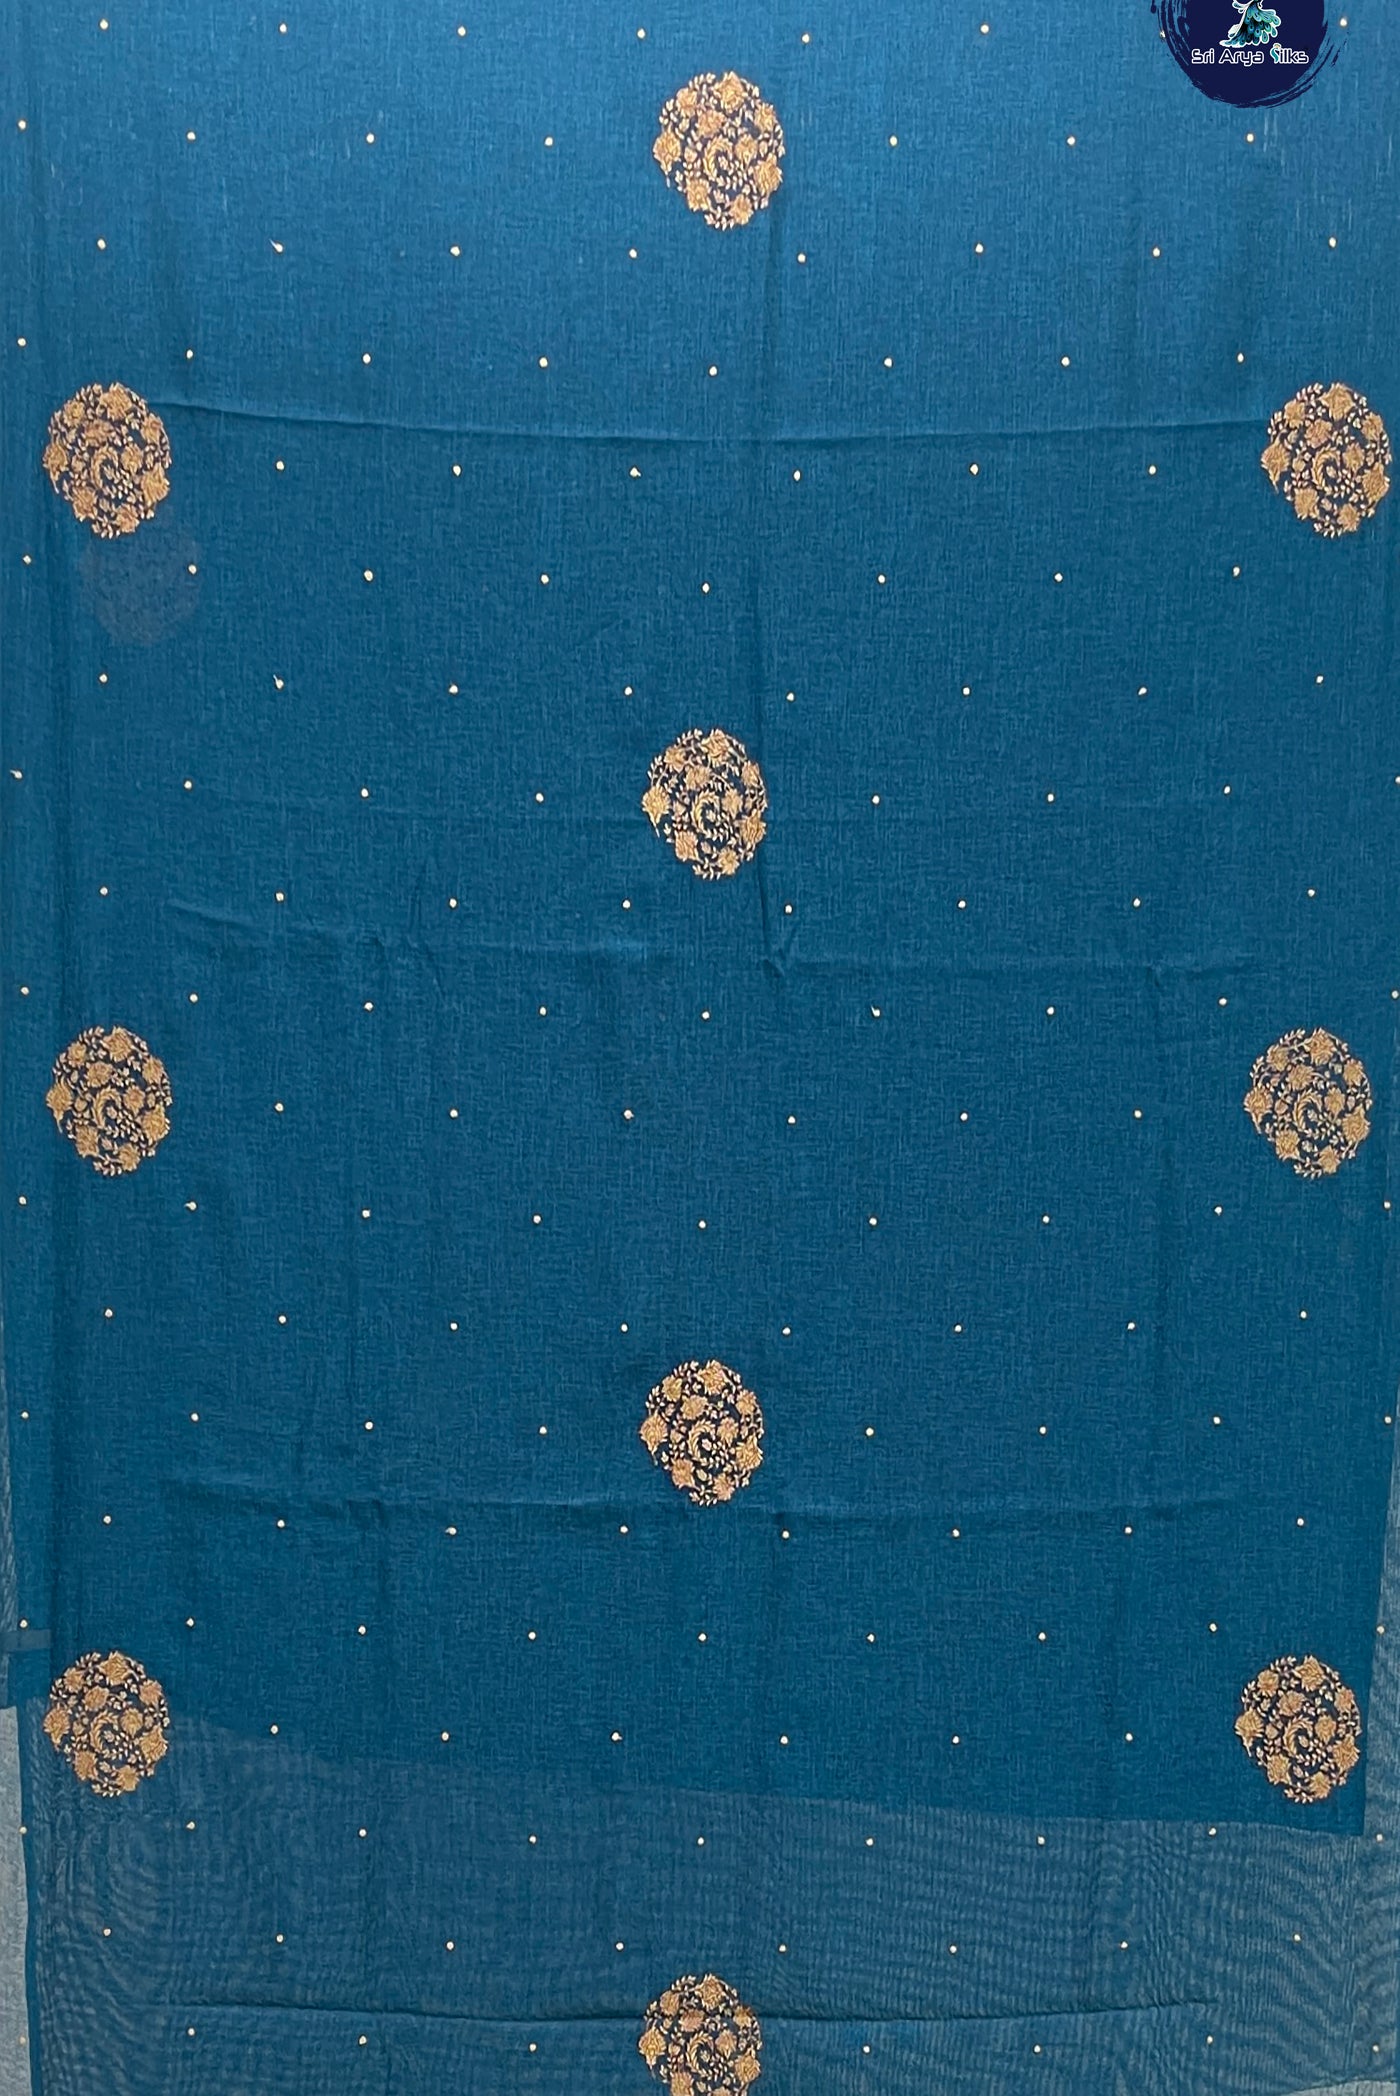 Teal Blue Jute Saree With Embroidery Pattern